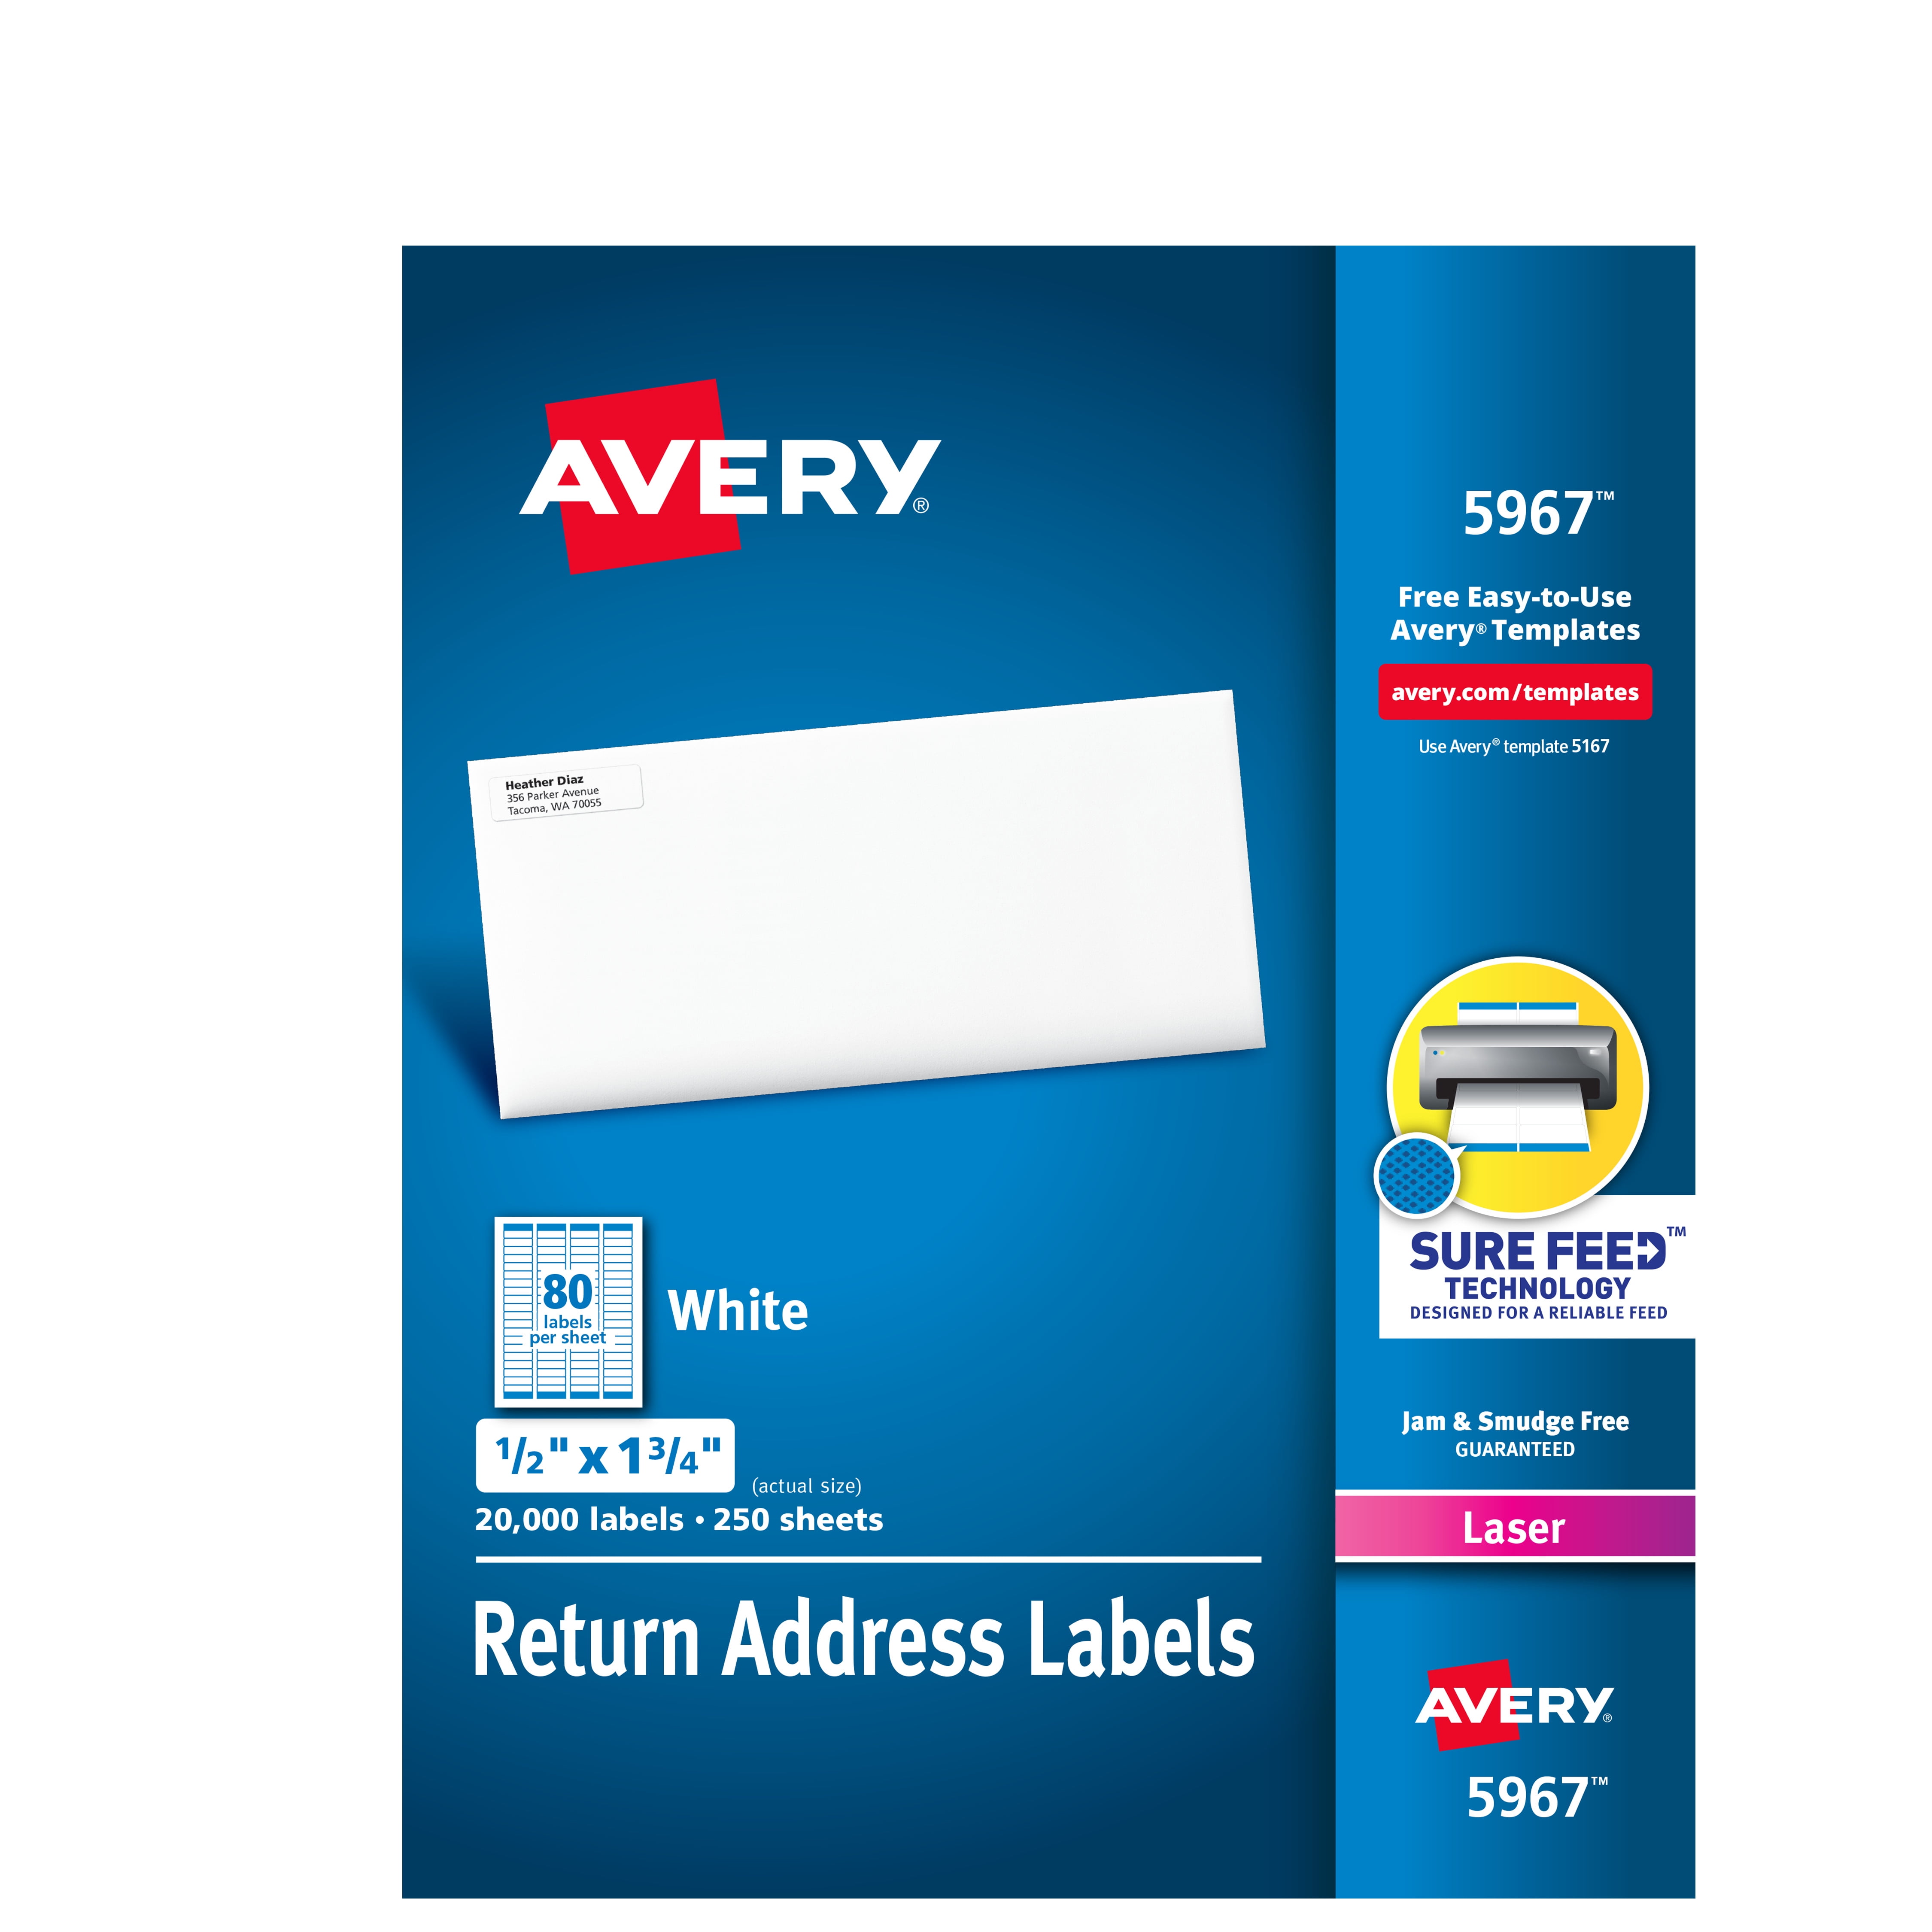 avery-8163-label-template-word